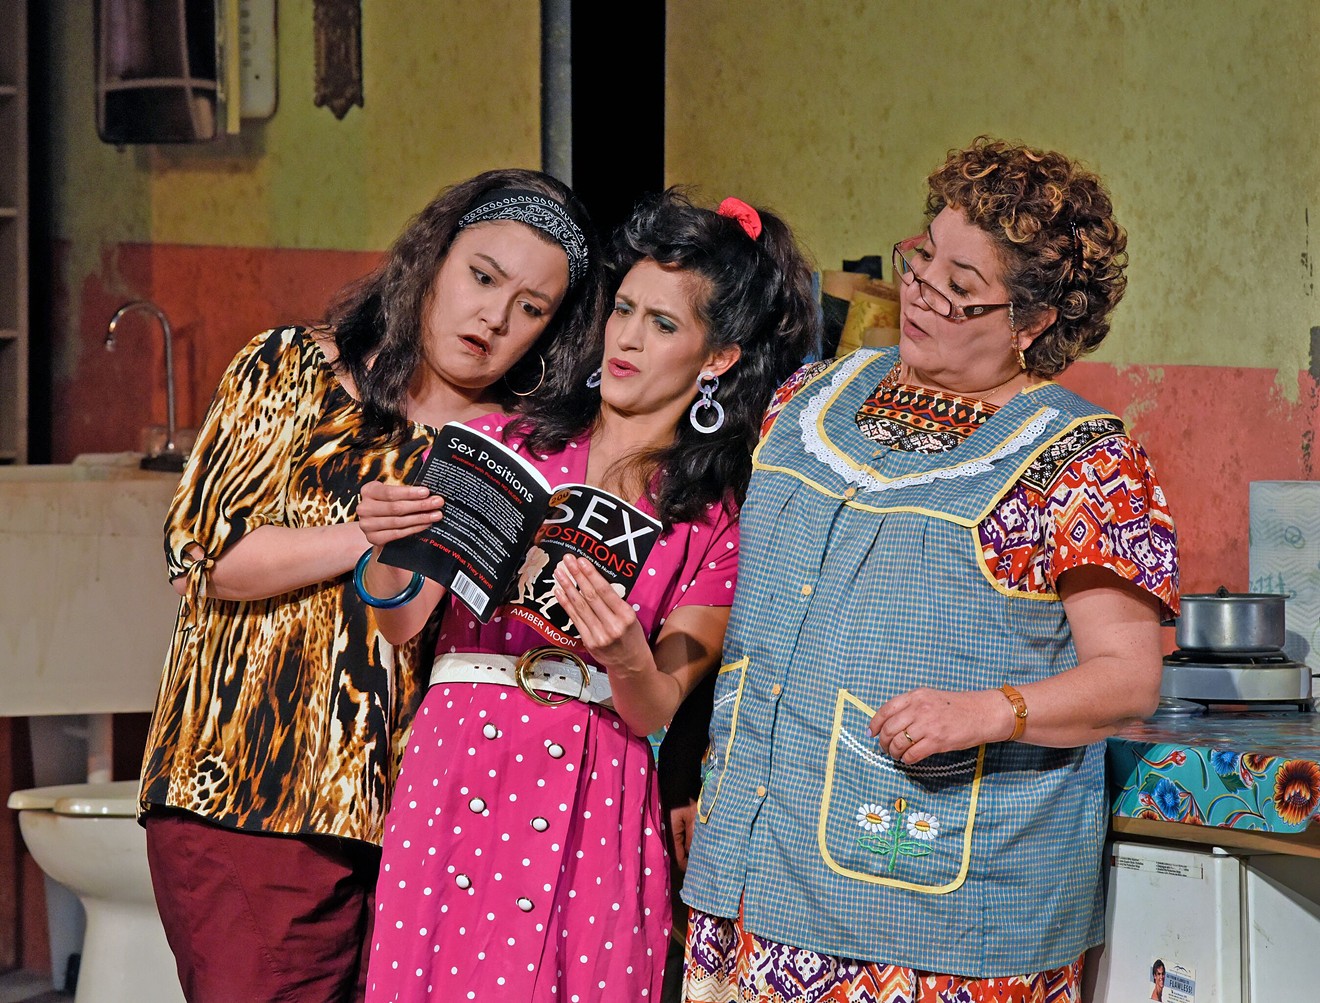 The cast of Real Women Have Curves at the Kalita Humphreys Theater